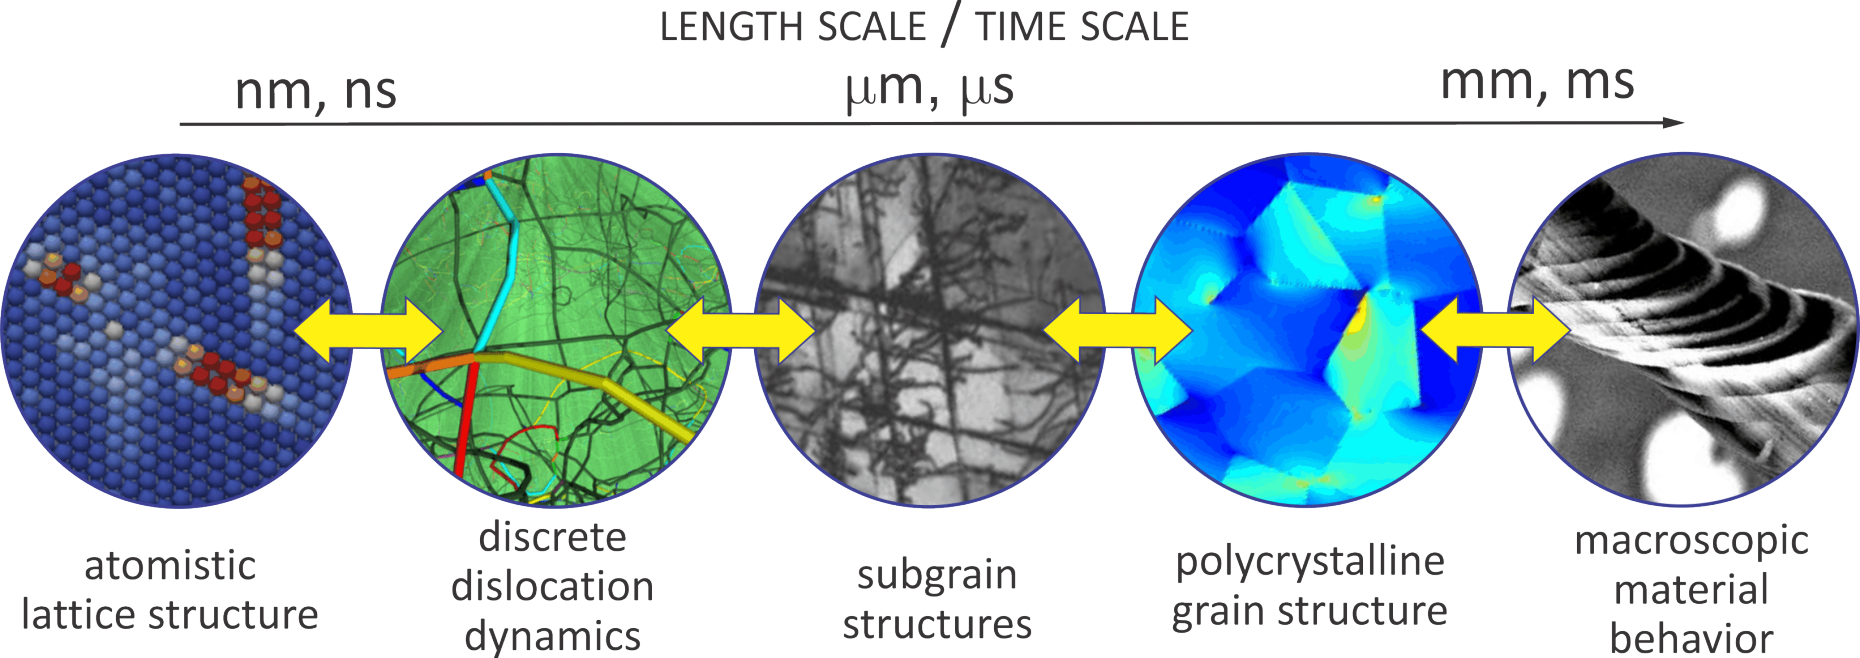 Enlarged view: Length and Time Scales